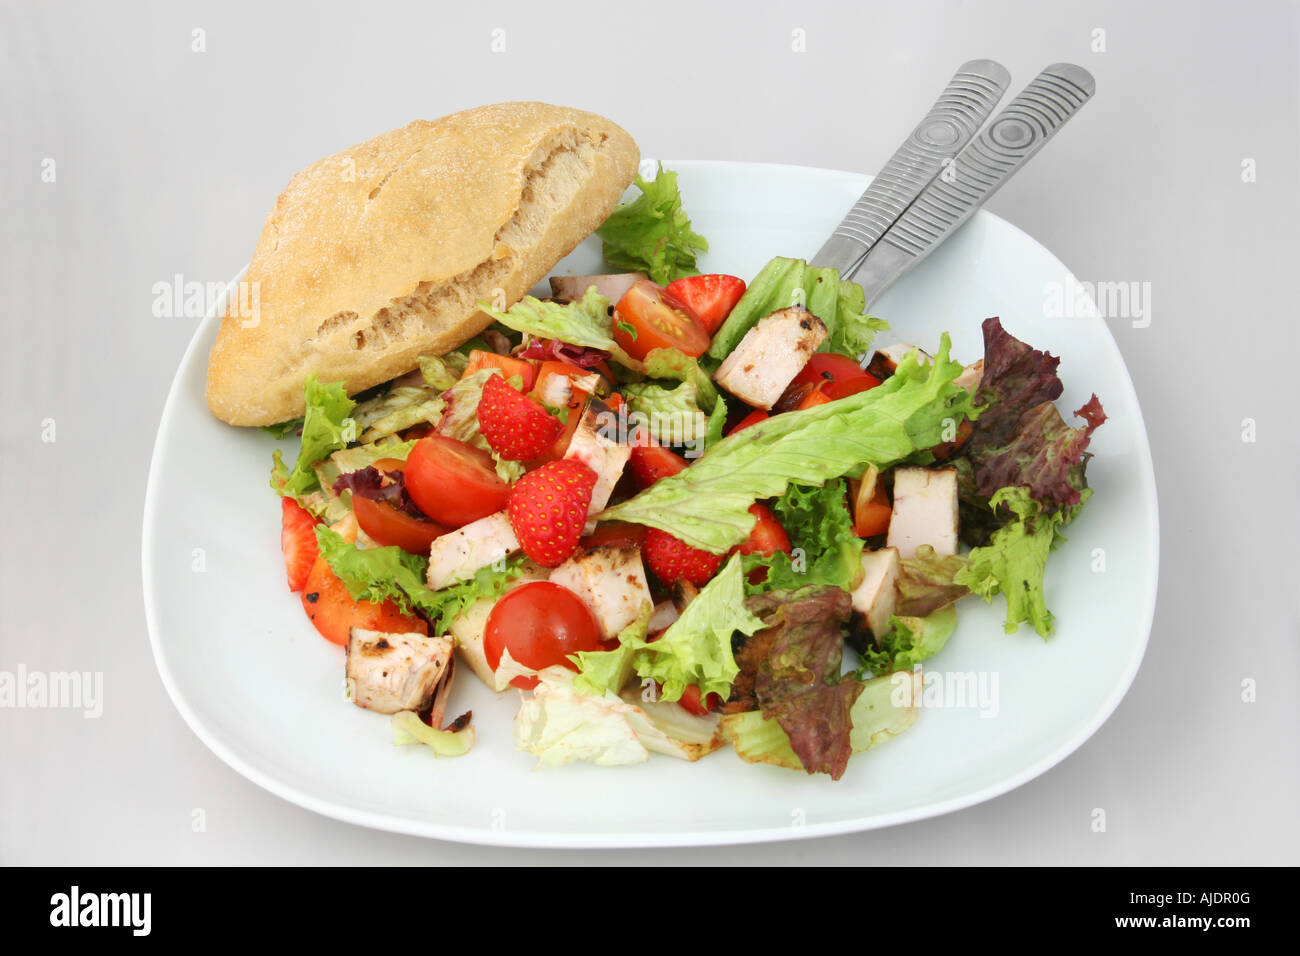 a dish of ready to eat chicken salad with bread Stock Photo